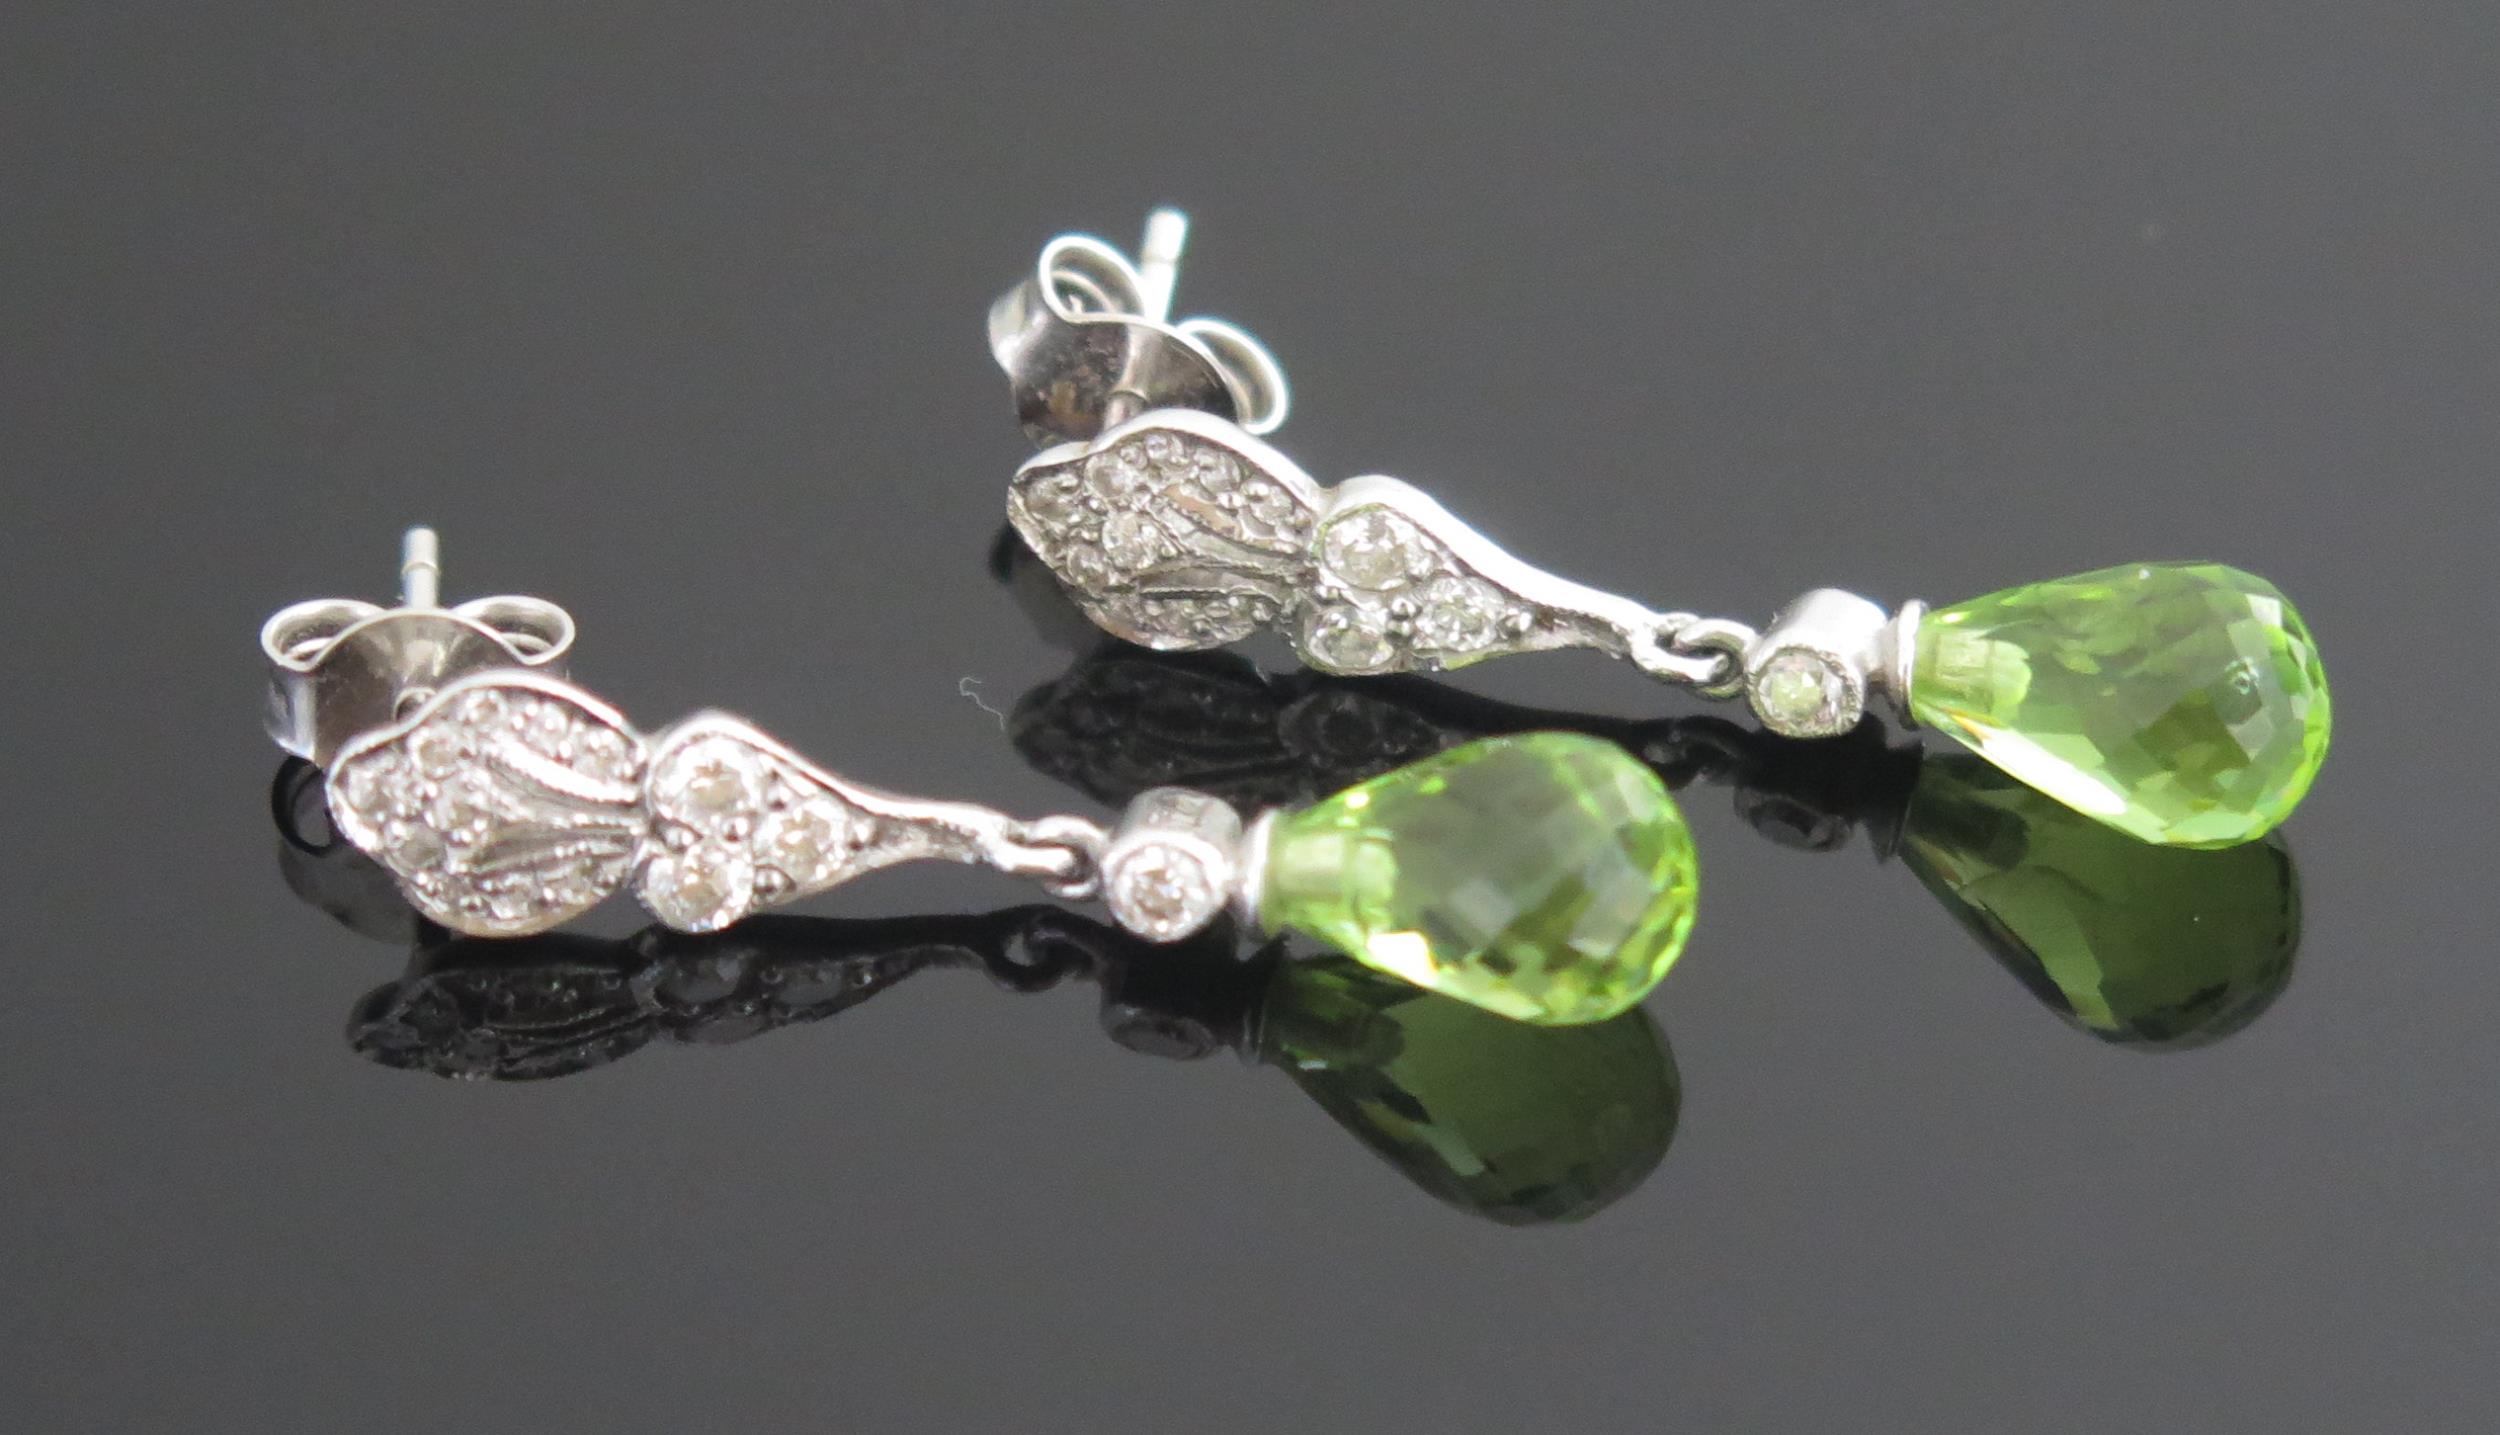 A Pair of 18ct White Gold, Diamond and Peridot? Pendant Earrings, c. 28.9mm drop, 3.29g